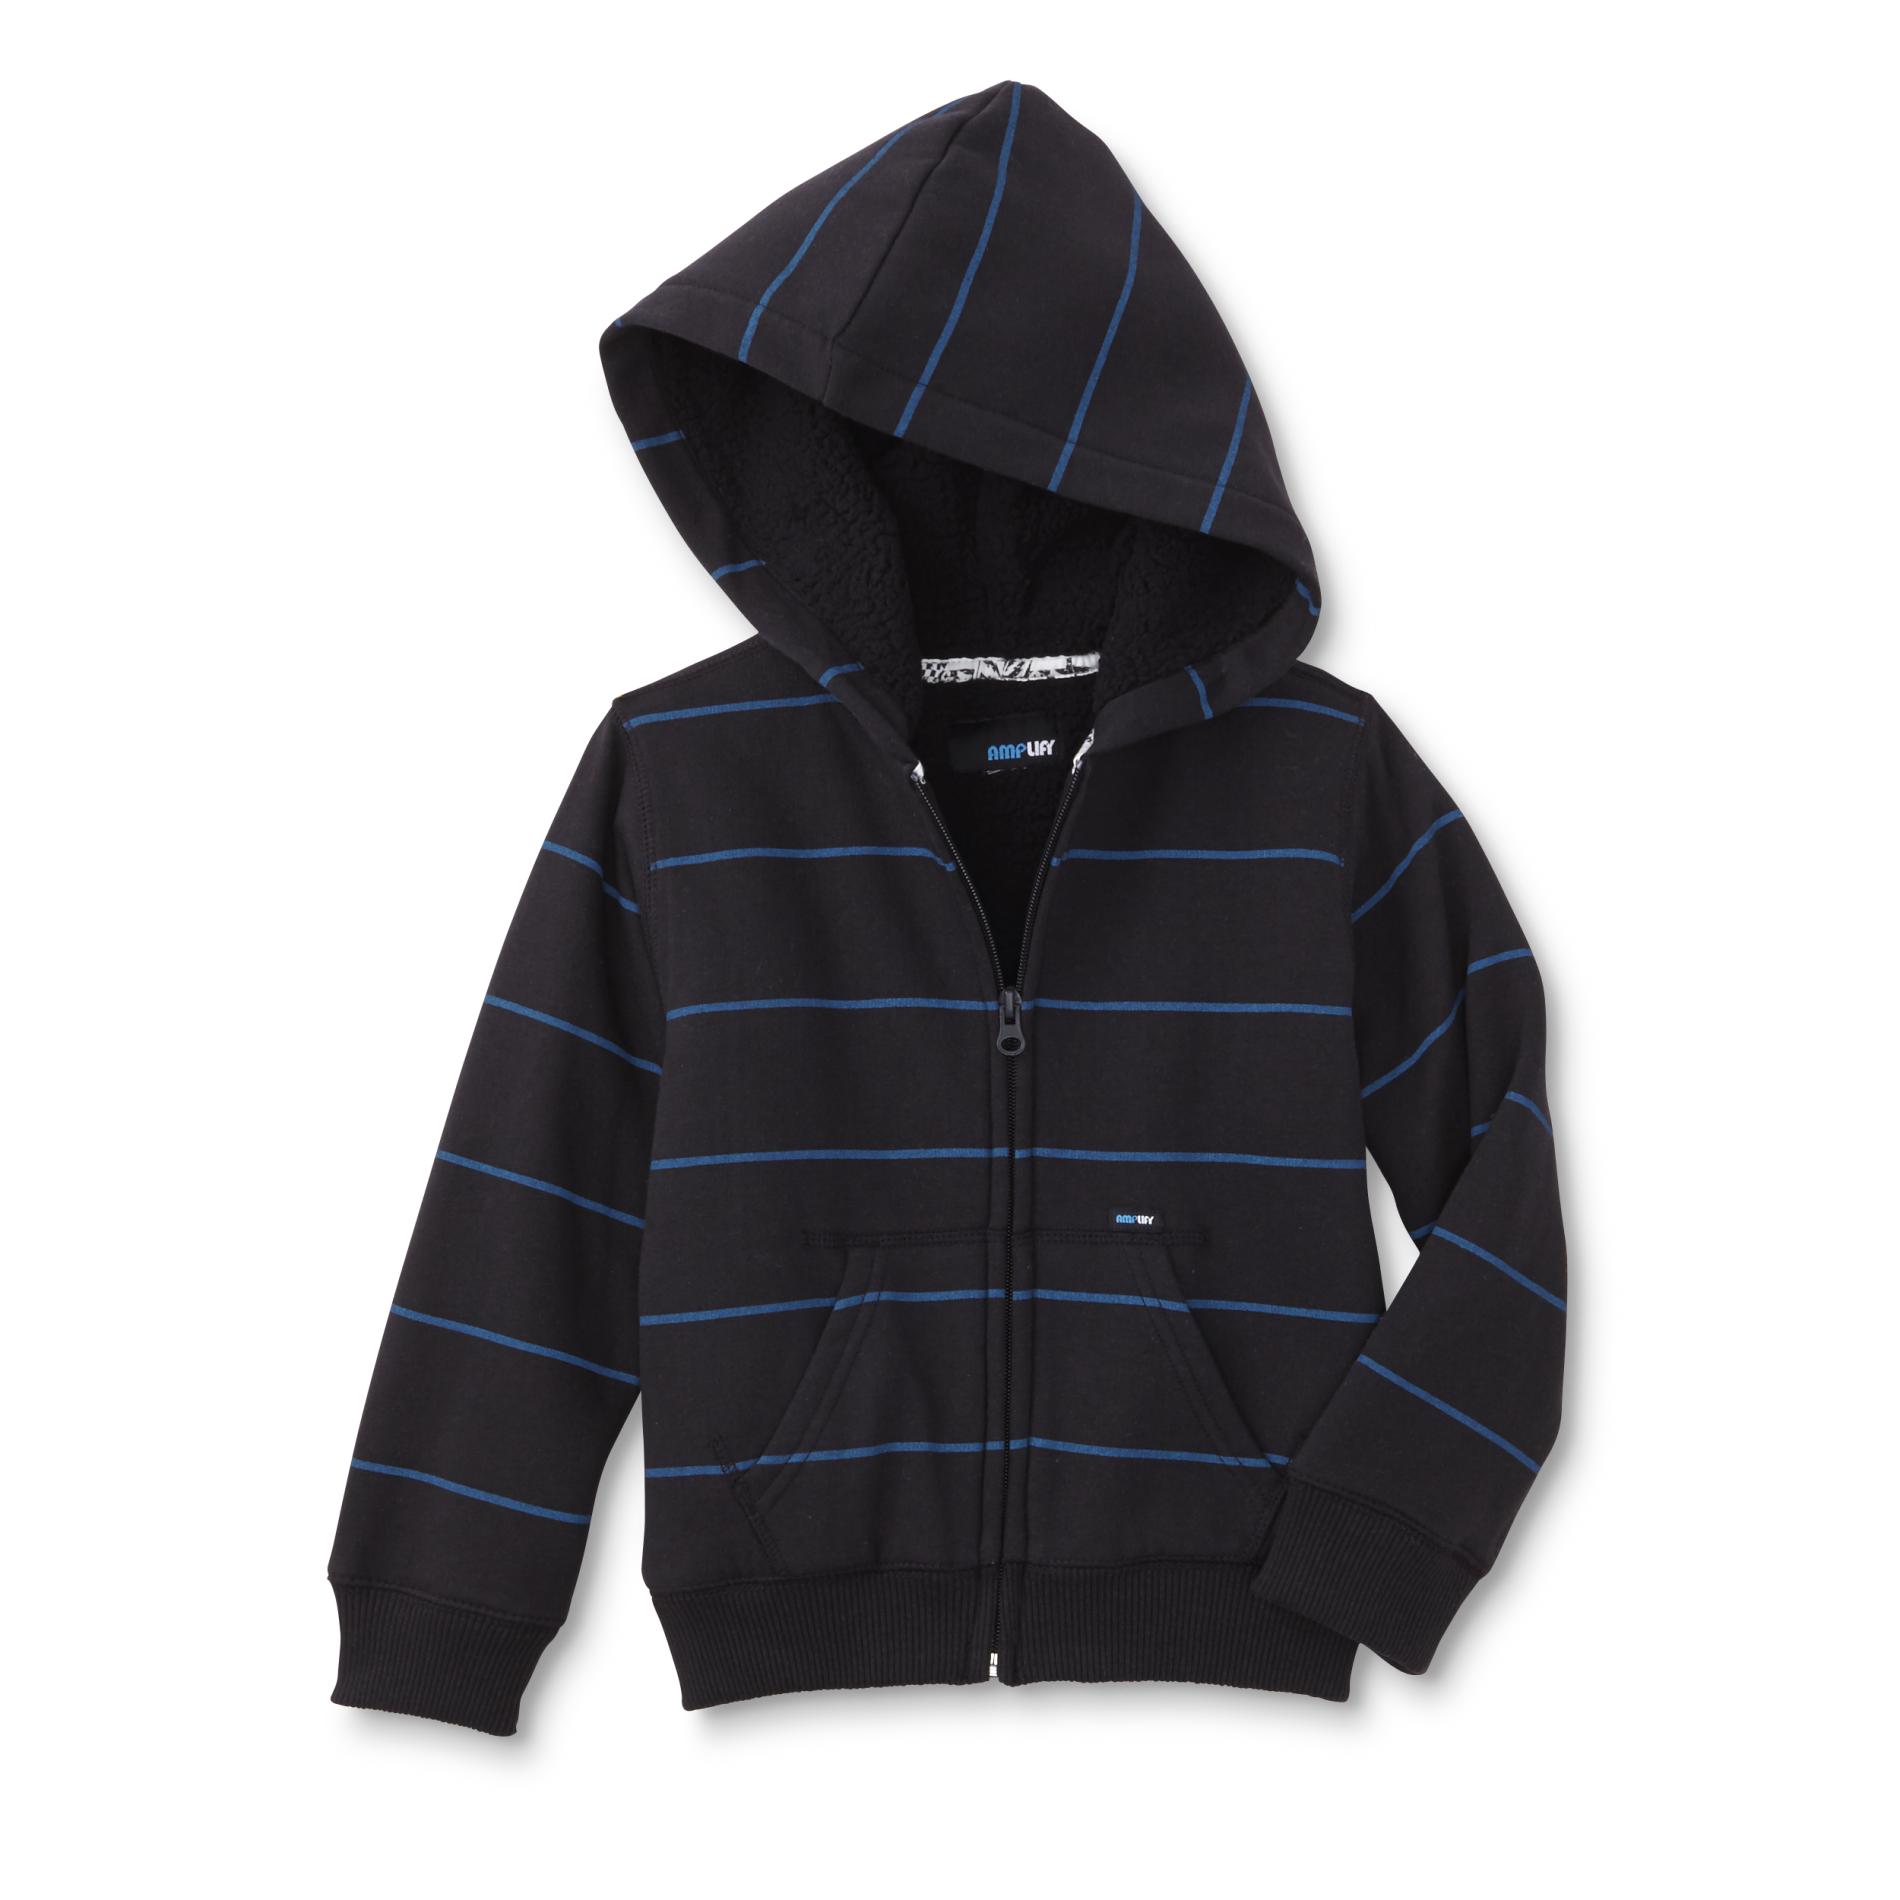 Amplify Boys' Lined Hoodie Jacket - Striped